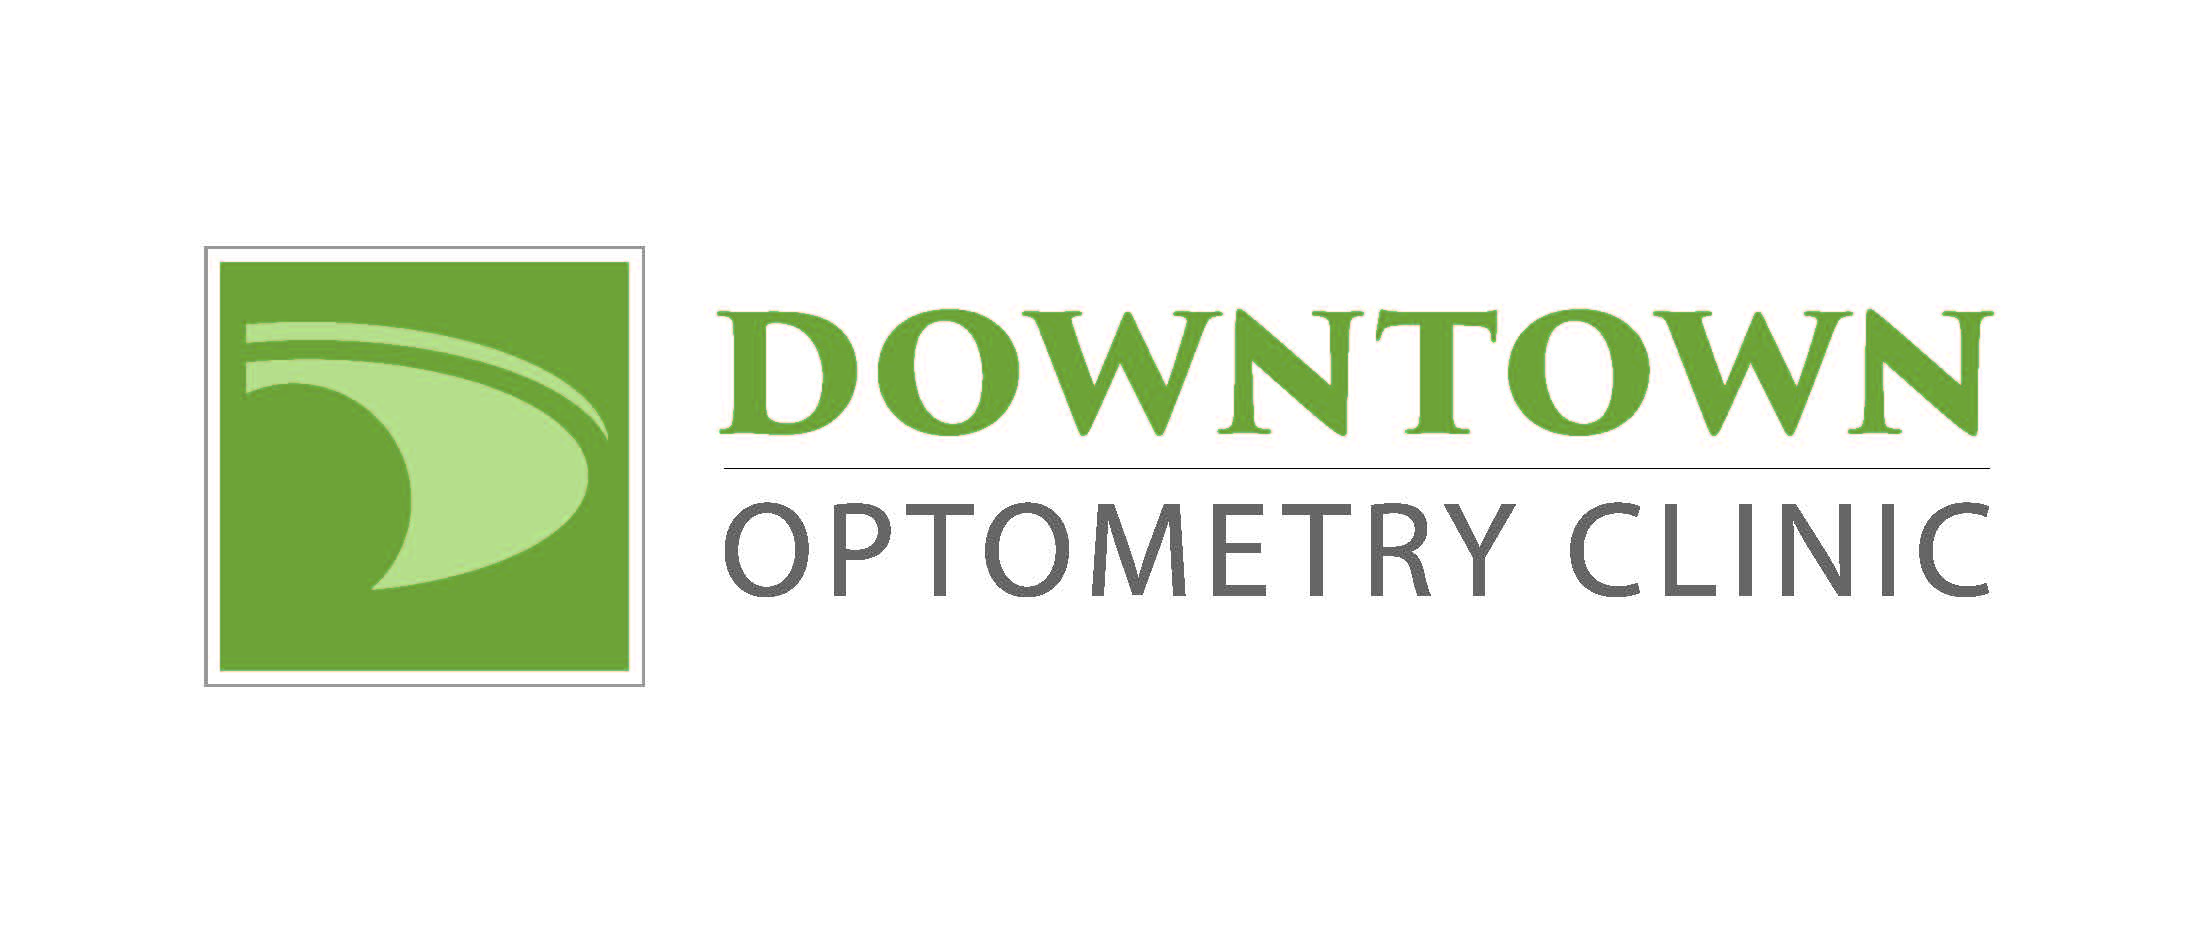 Downtown Optomerty Clinic 